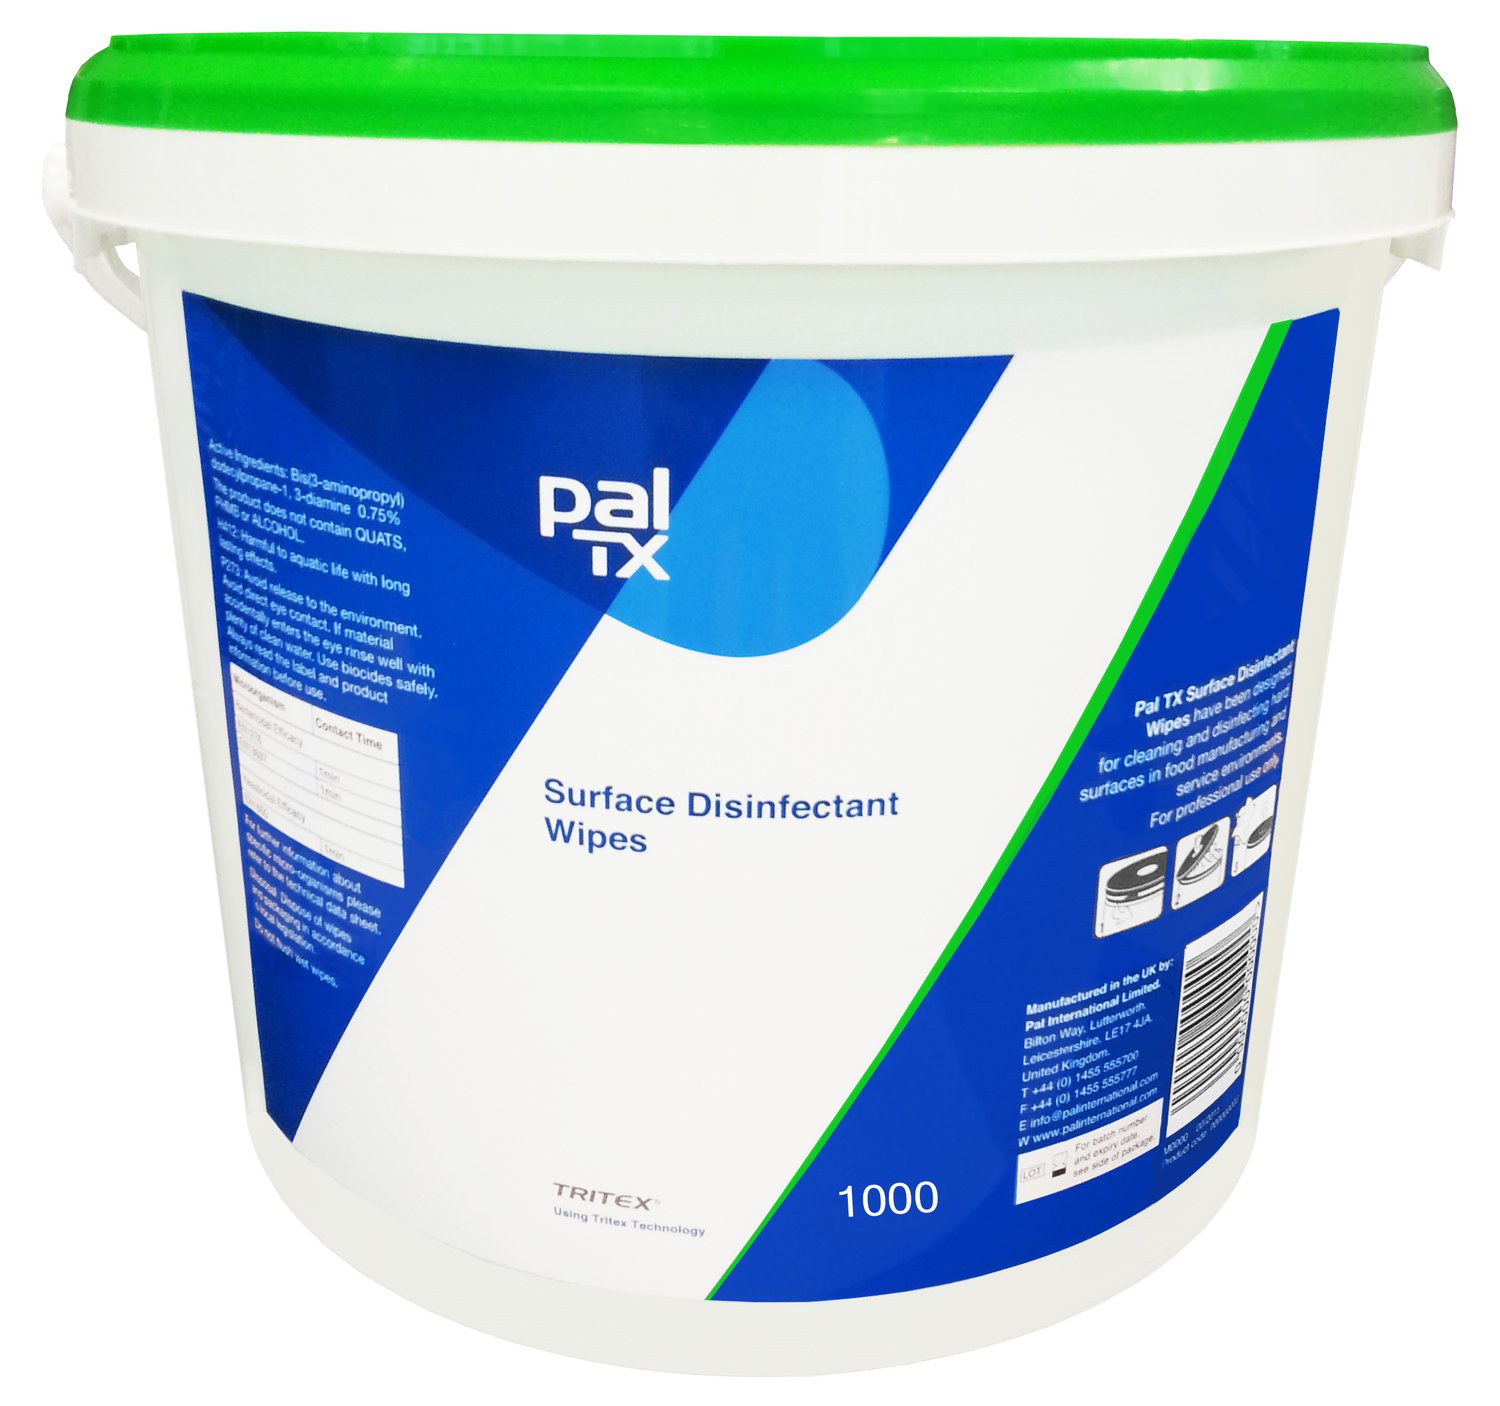 Pal TX Surface / Disinfectant Wipes 1000's (Replaces P1 W64230 / P1 W67230)